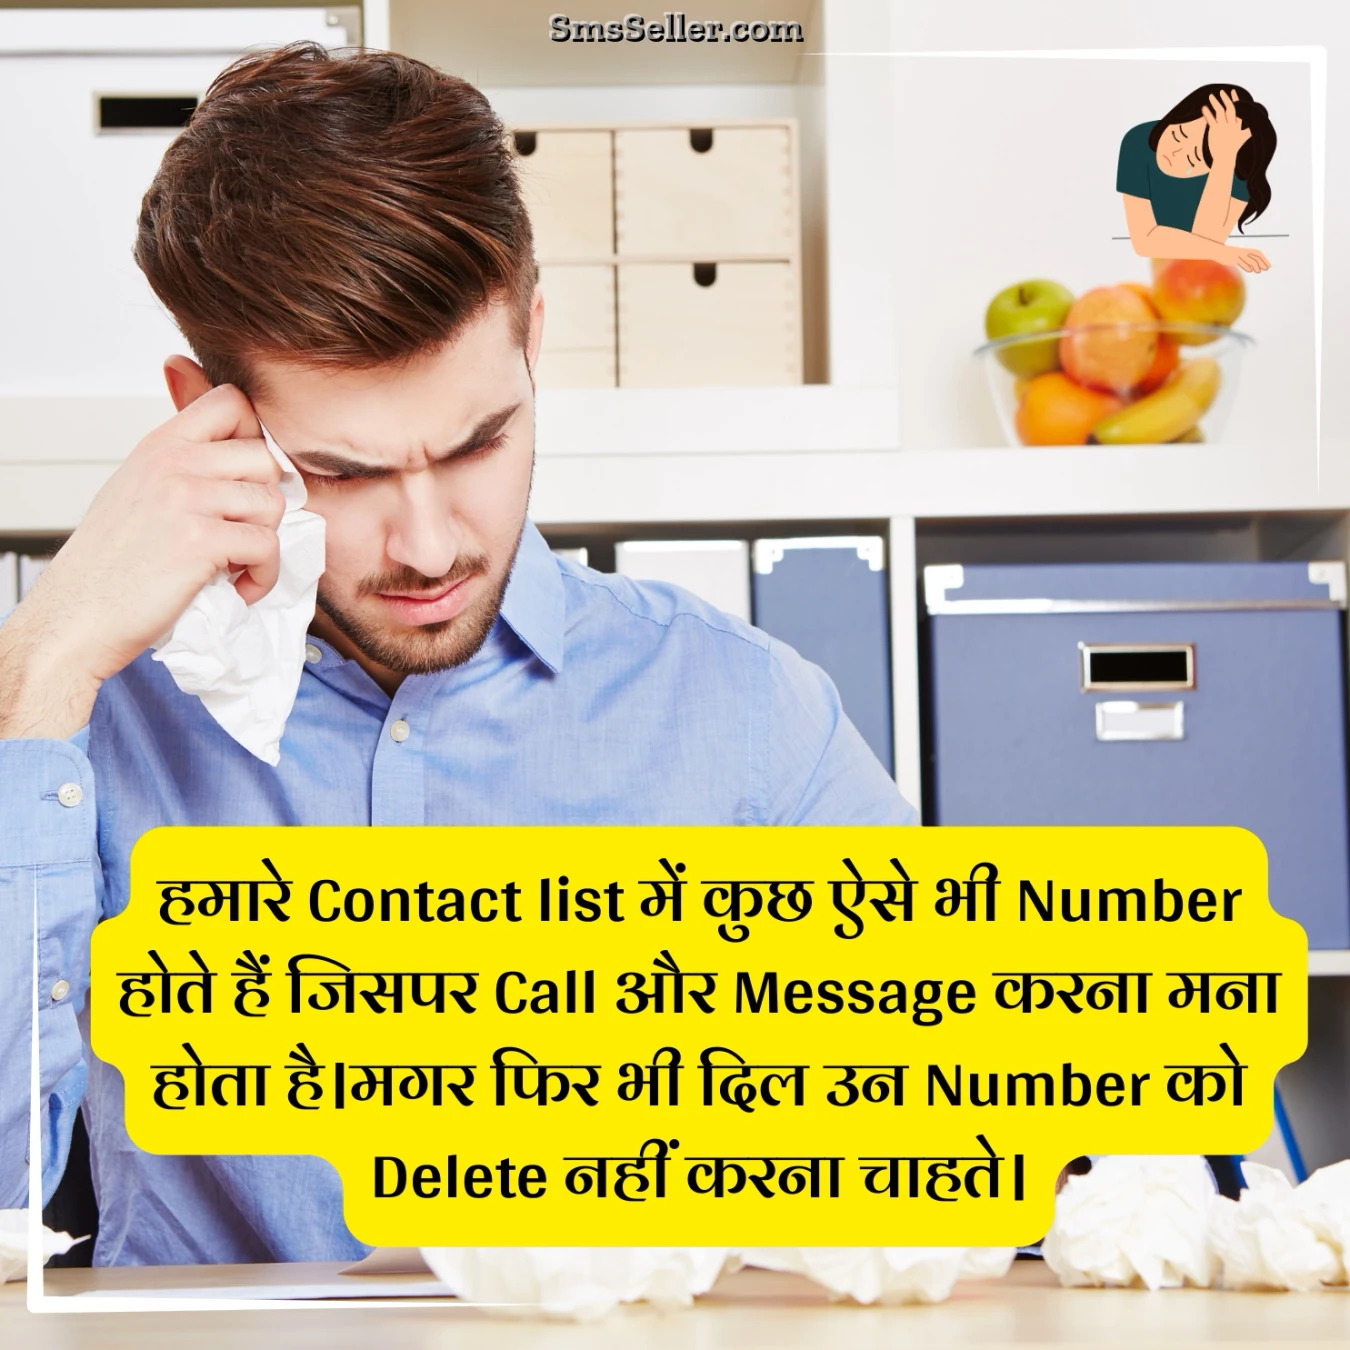 sad status in hindi in our contact list some